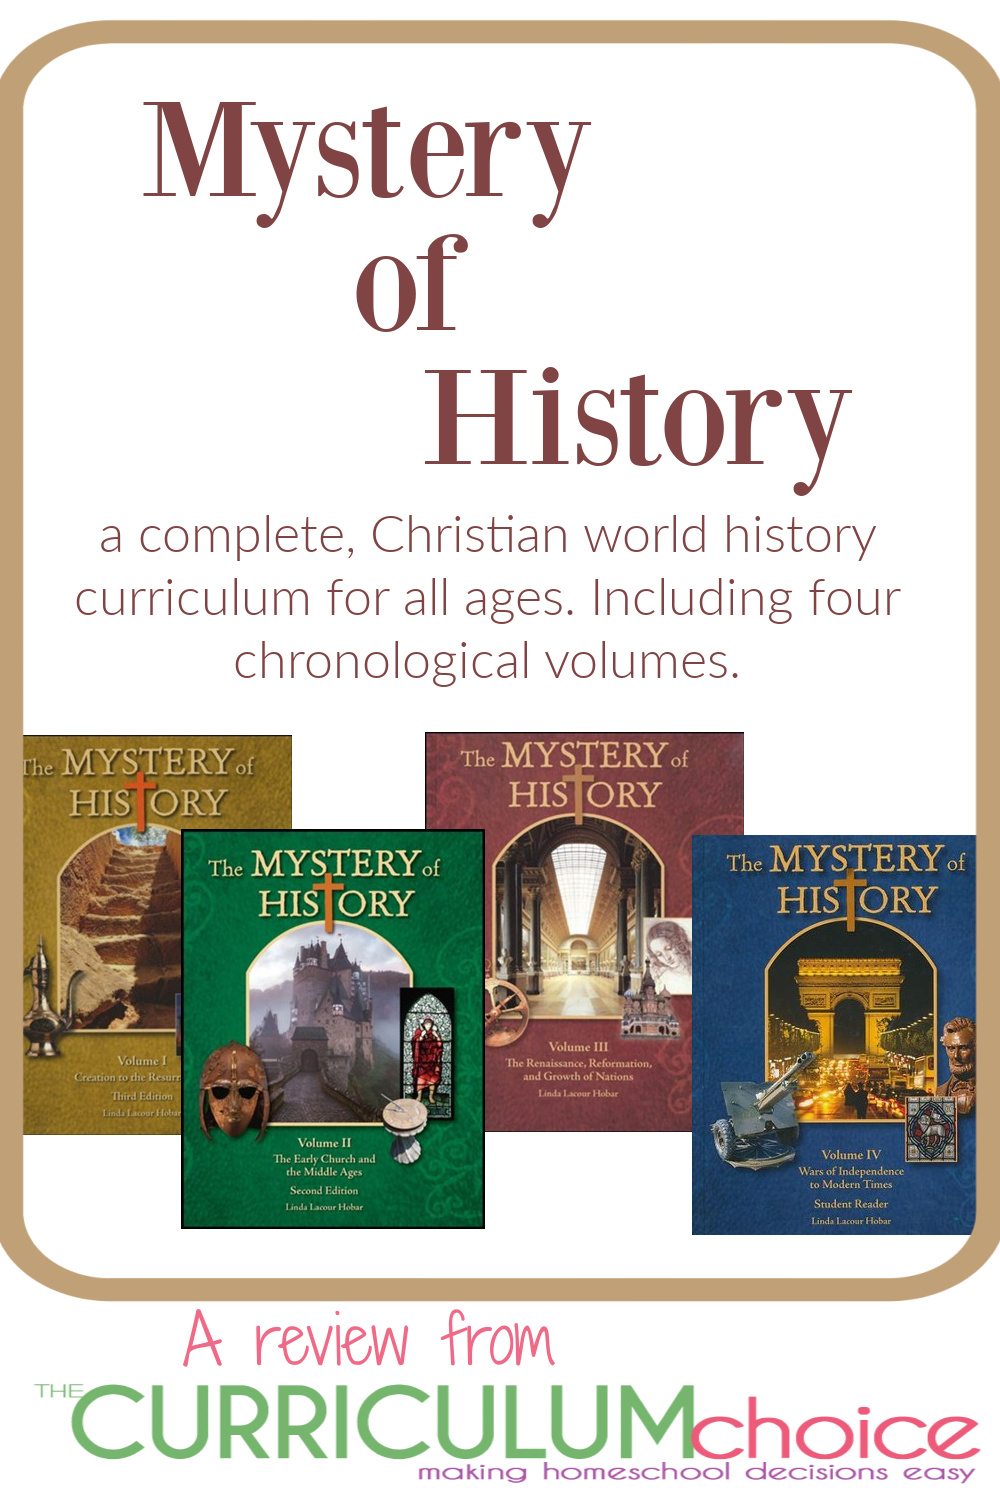 The Mystery of History is a complete, Christian world history curriculum for all ages. Including four chronological volumes. A review from The Curriculum Choice